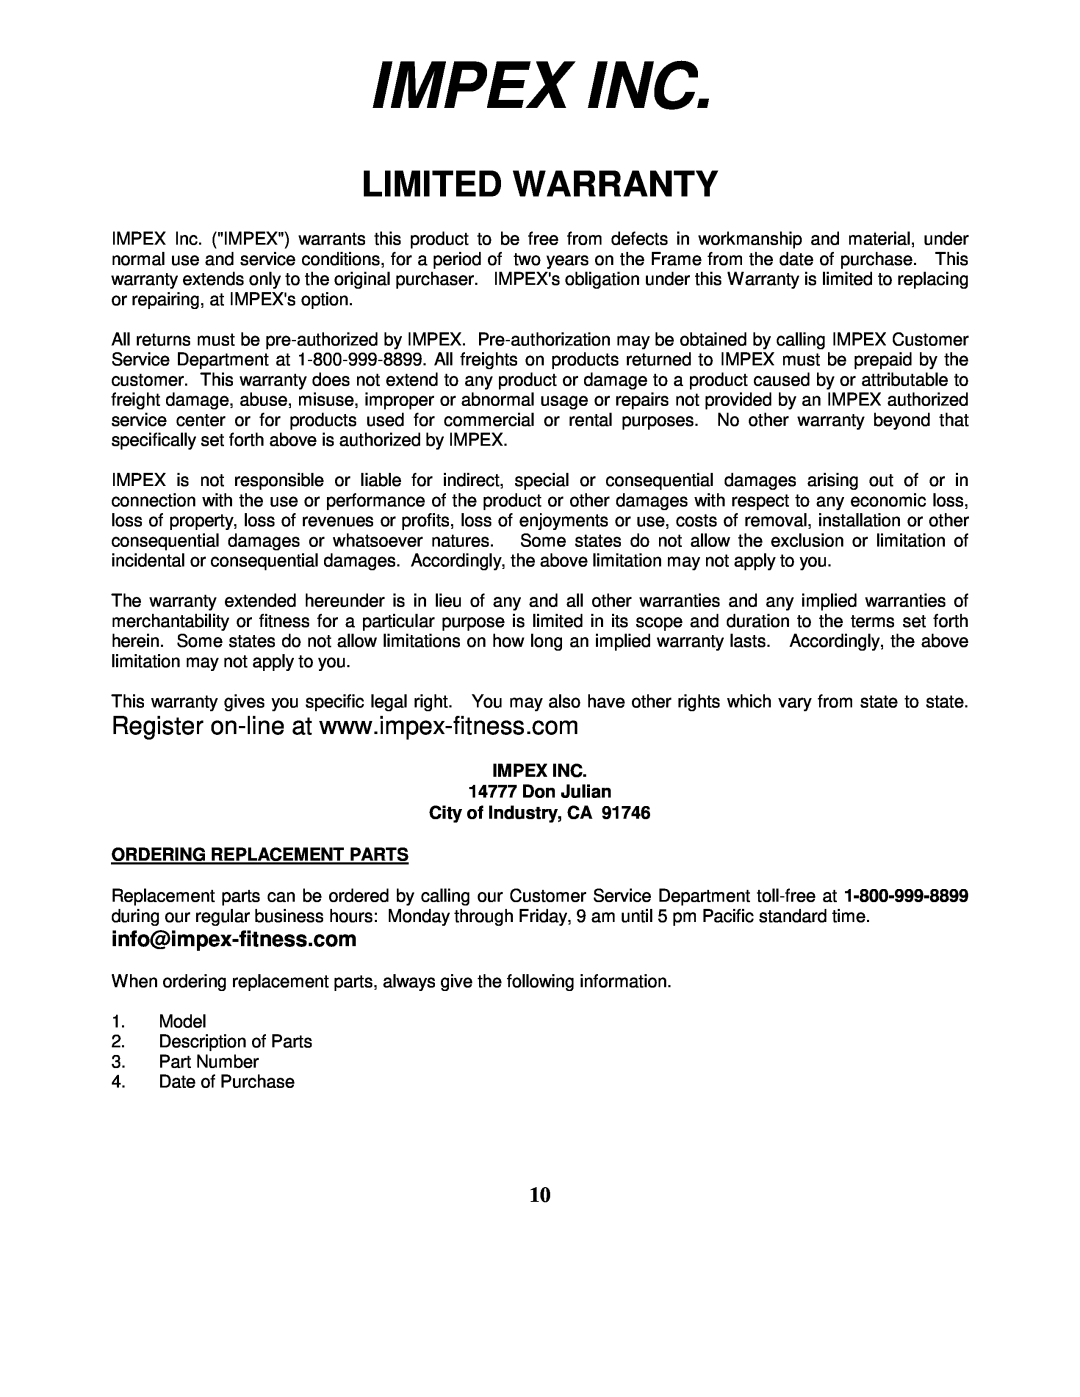 Impex CB-339 Impex Inc, Limited Warranty, IMPEX INC 14777 Don Julian City of Industry, CA, Ordering Replacement Parts 